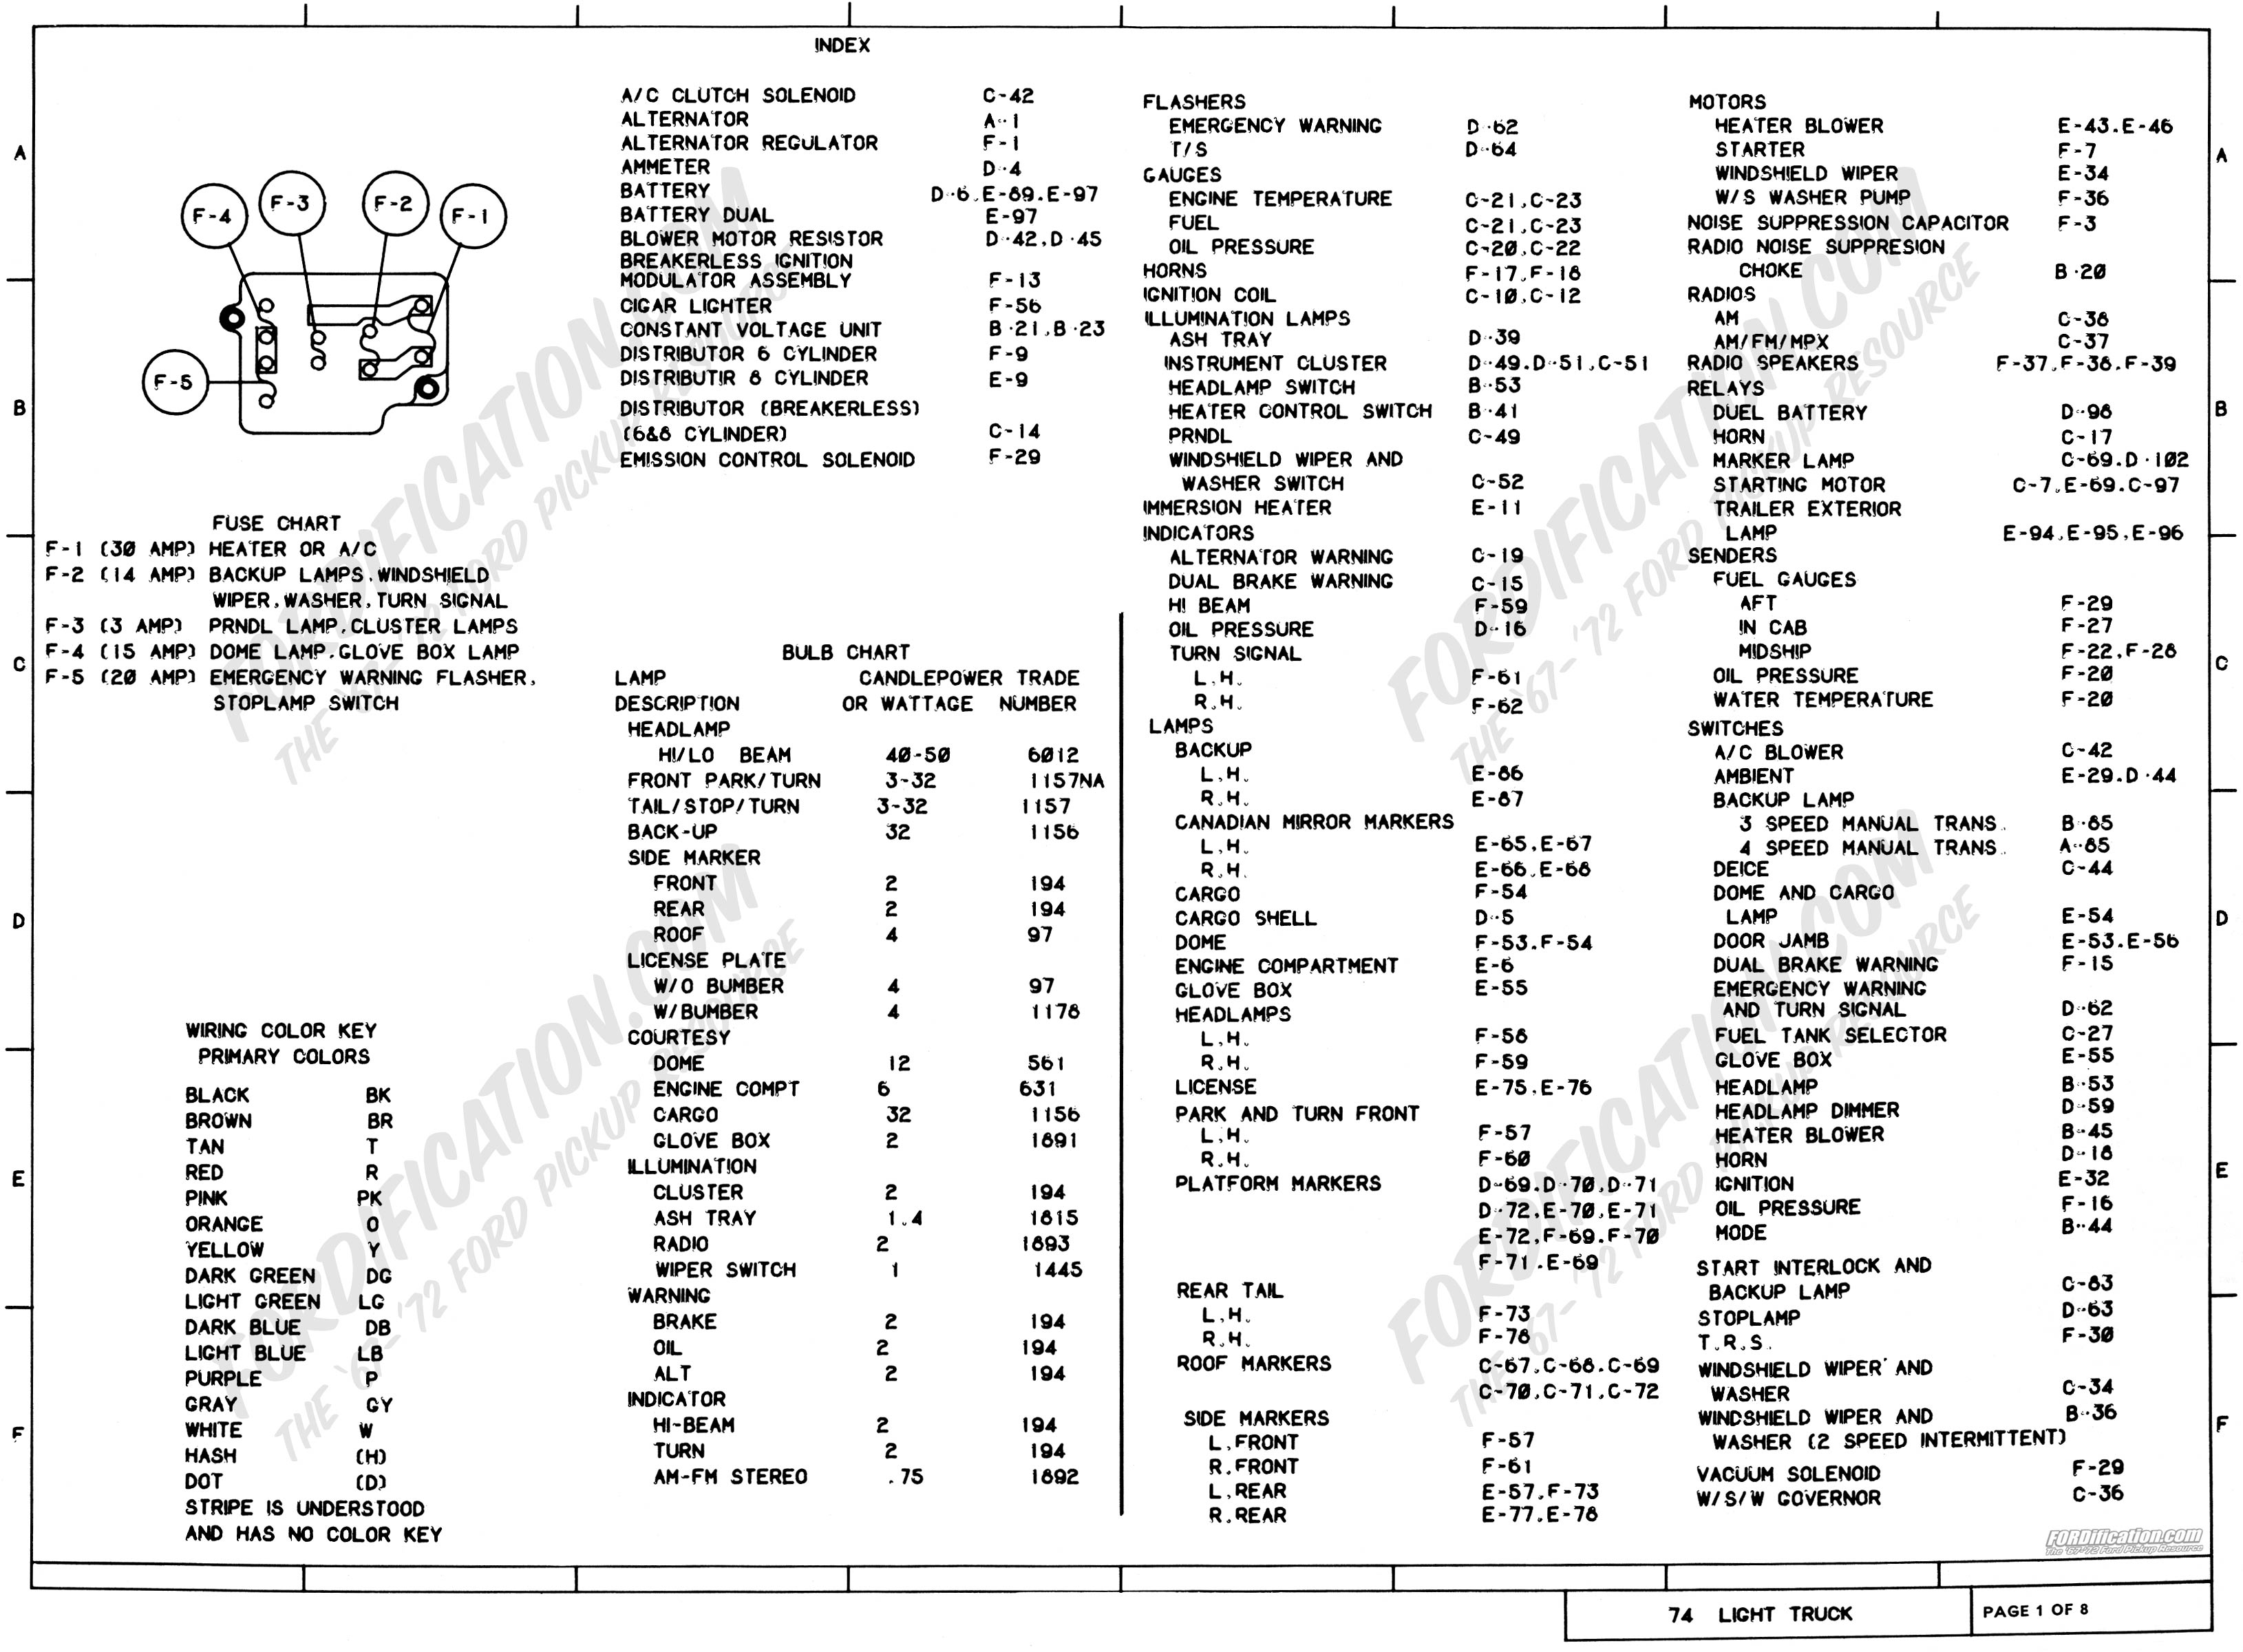 1997 Ford F150 Wiring Diagram from www.fordification.net